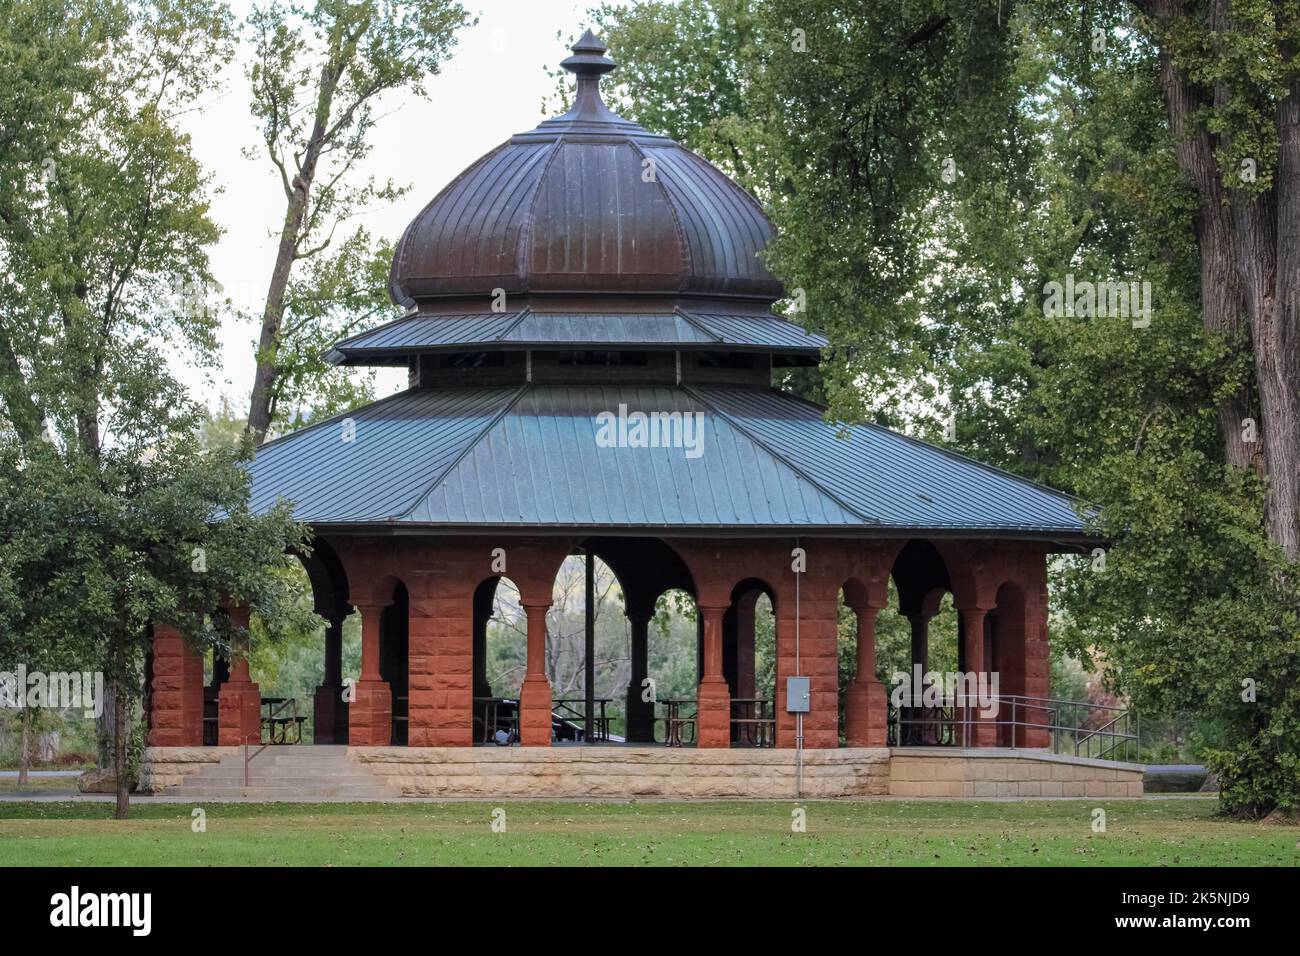 An antiquated stone gazebo in a park. Stock Photo